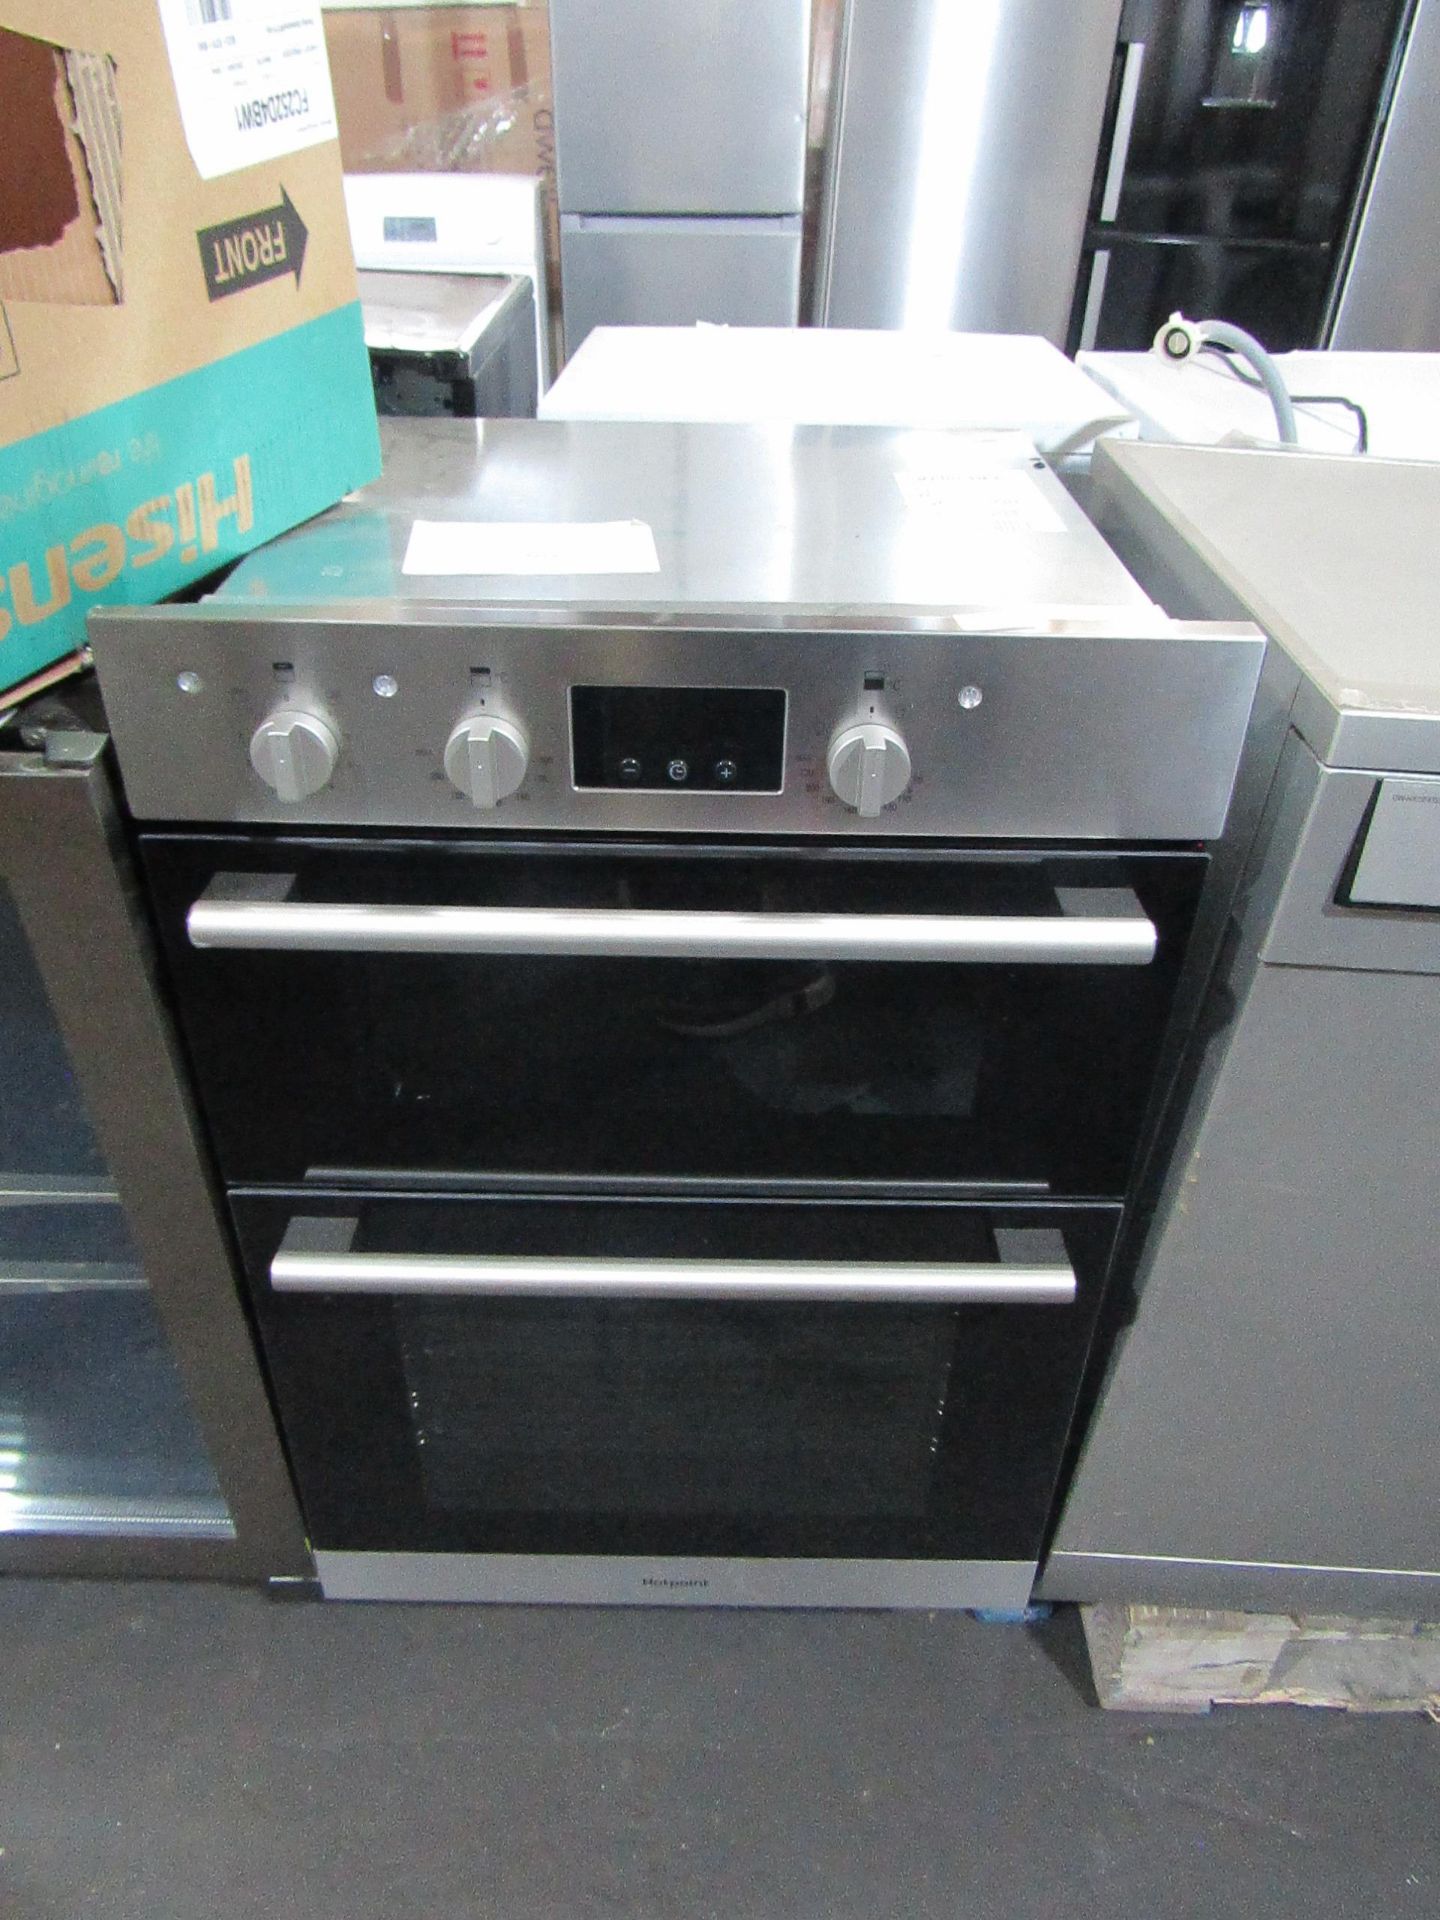 1 x Hotpoint Double Oven model no. DD2544CIX_SS RRP ??359.00 SKU AO-APM-2370697-BER-DOA TOTAL